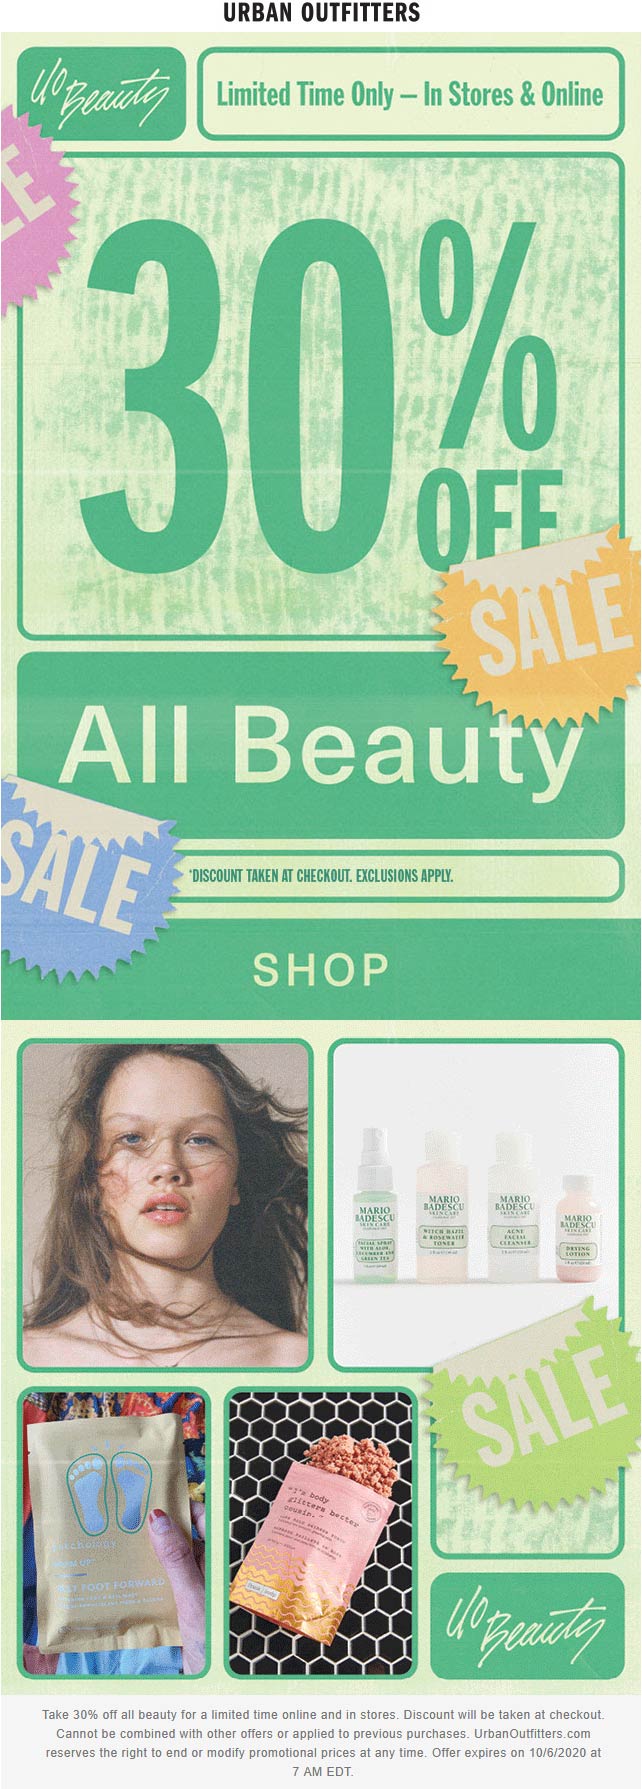 Urban Outfitters stores Coupon  30% off beauty at Urban Outfitters, ditto online #urbanoutfitters 